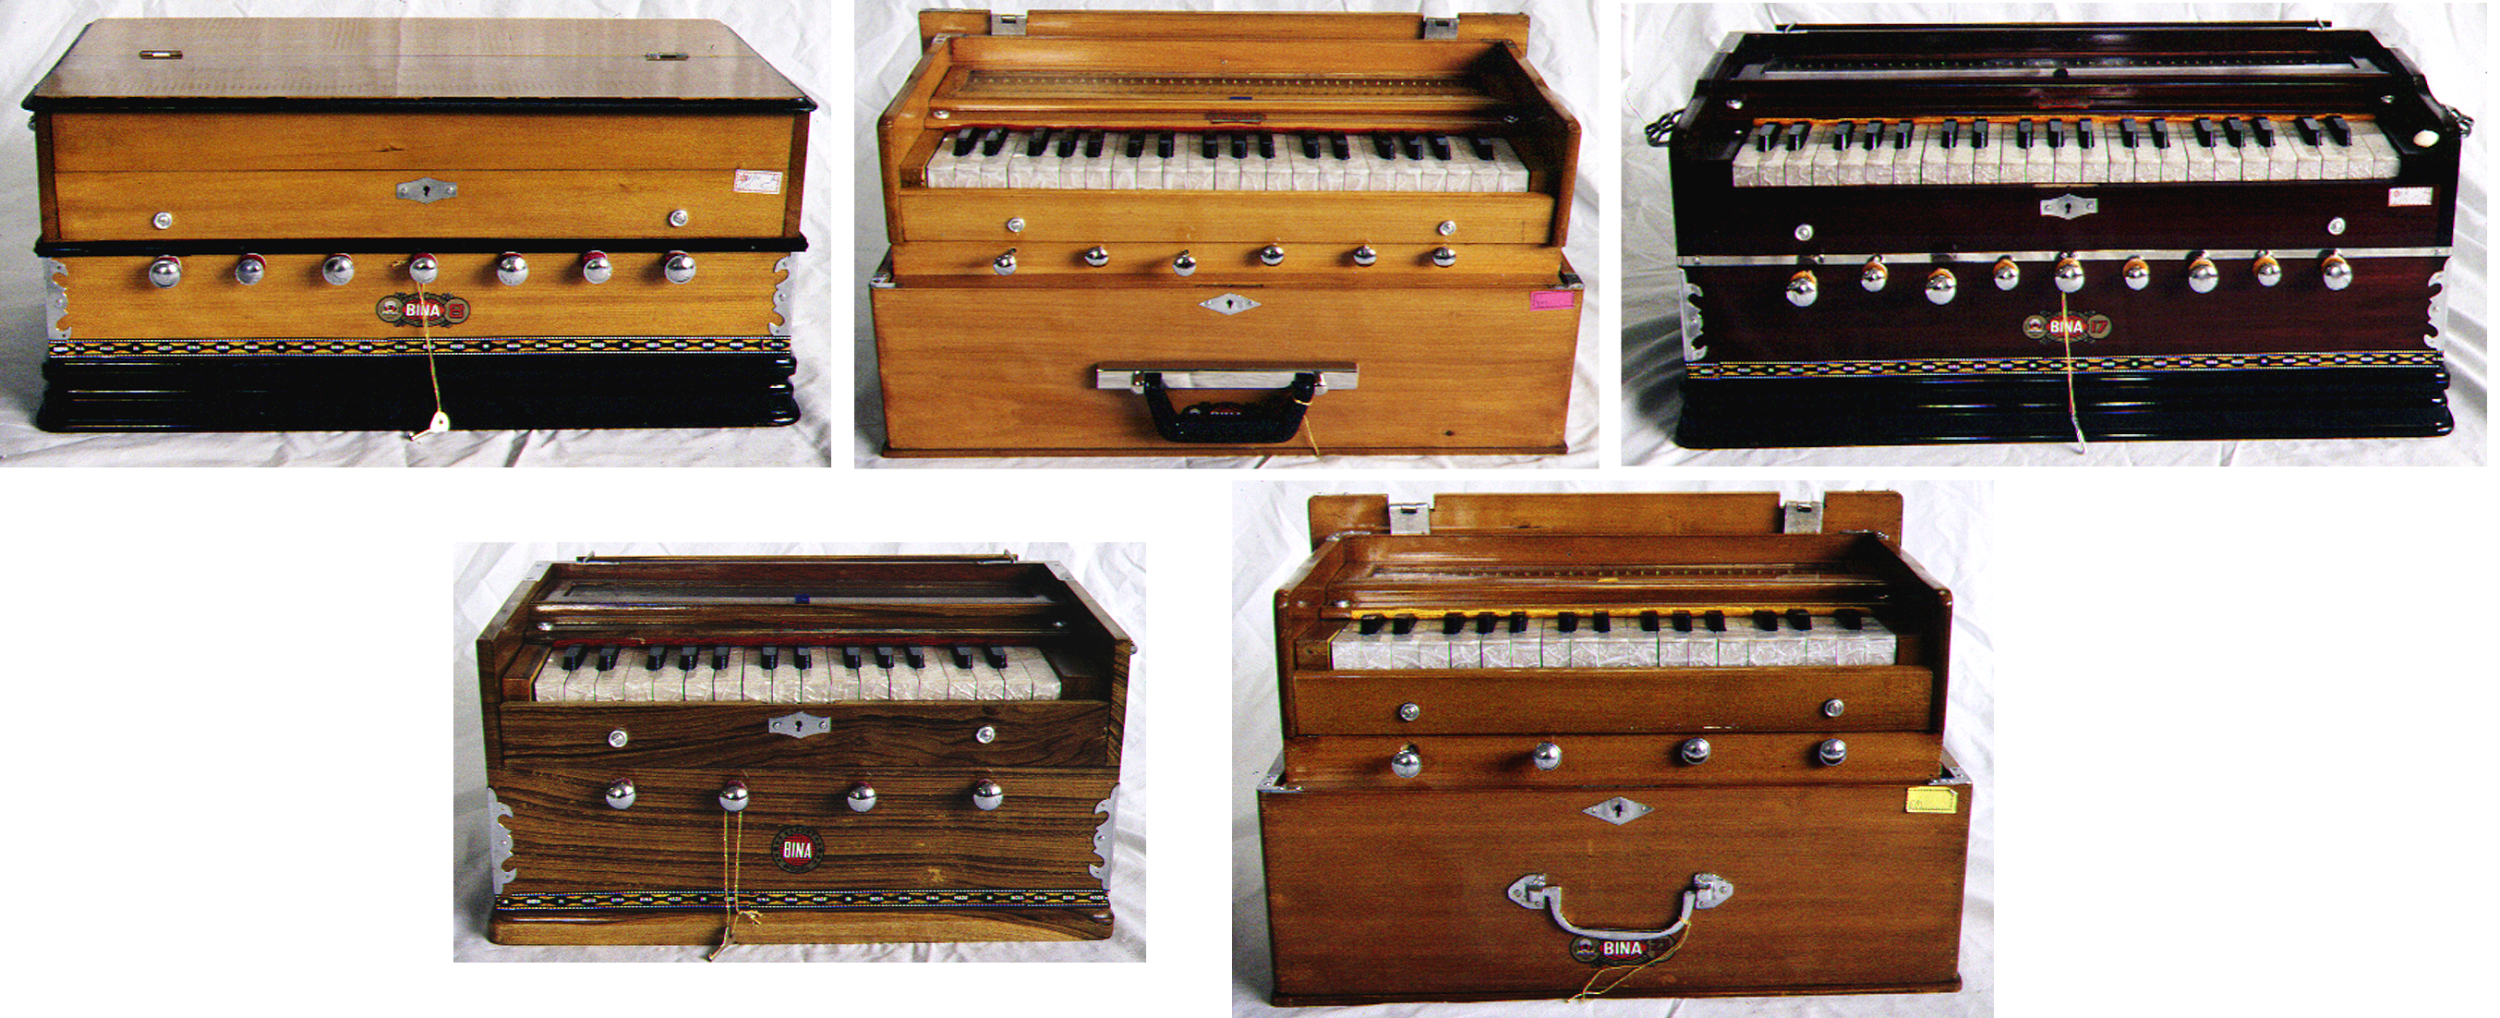 A selection of different Bina harmoniums, including standard and collapsible models.